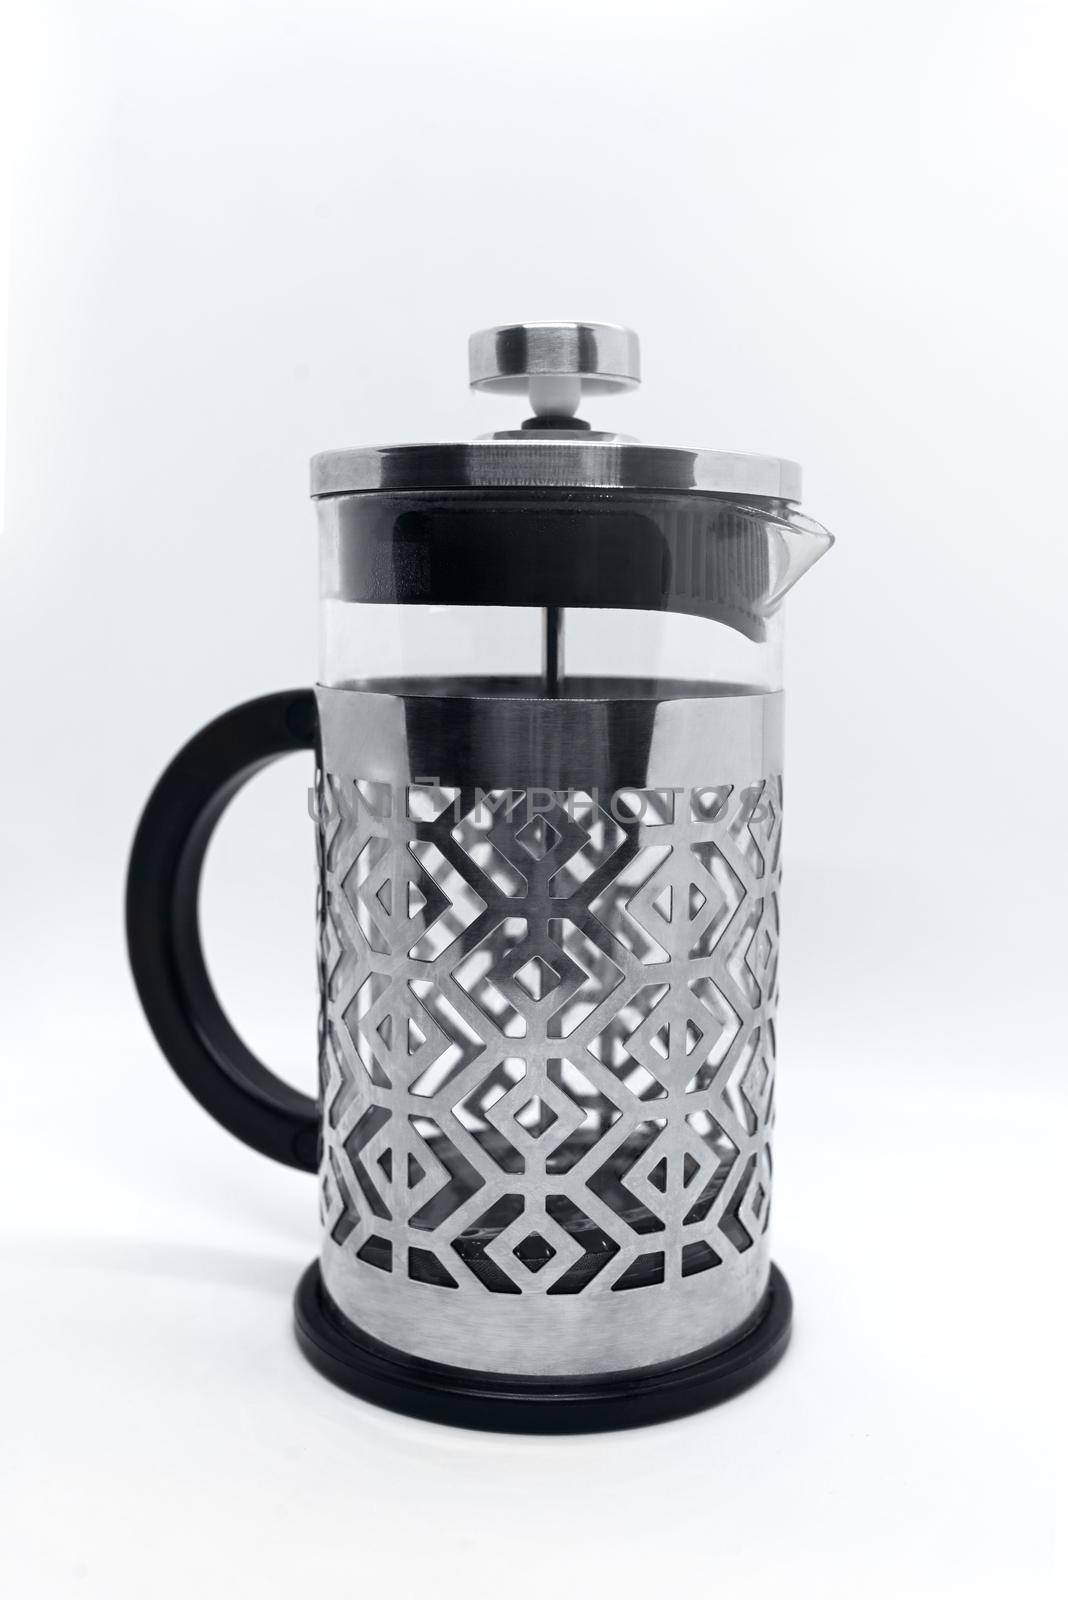 Clear Press Coffee Maker Isolated on White. French Press in Stainless Steel with Removable Borosilicate Glass Flask for Hot Cold Drinks. Modern Small Domestic Kitchenware. Vessel for Filtering Blend